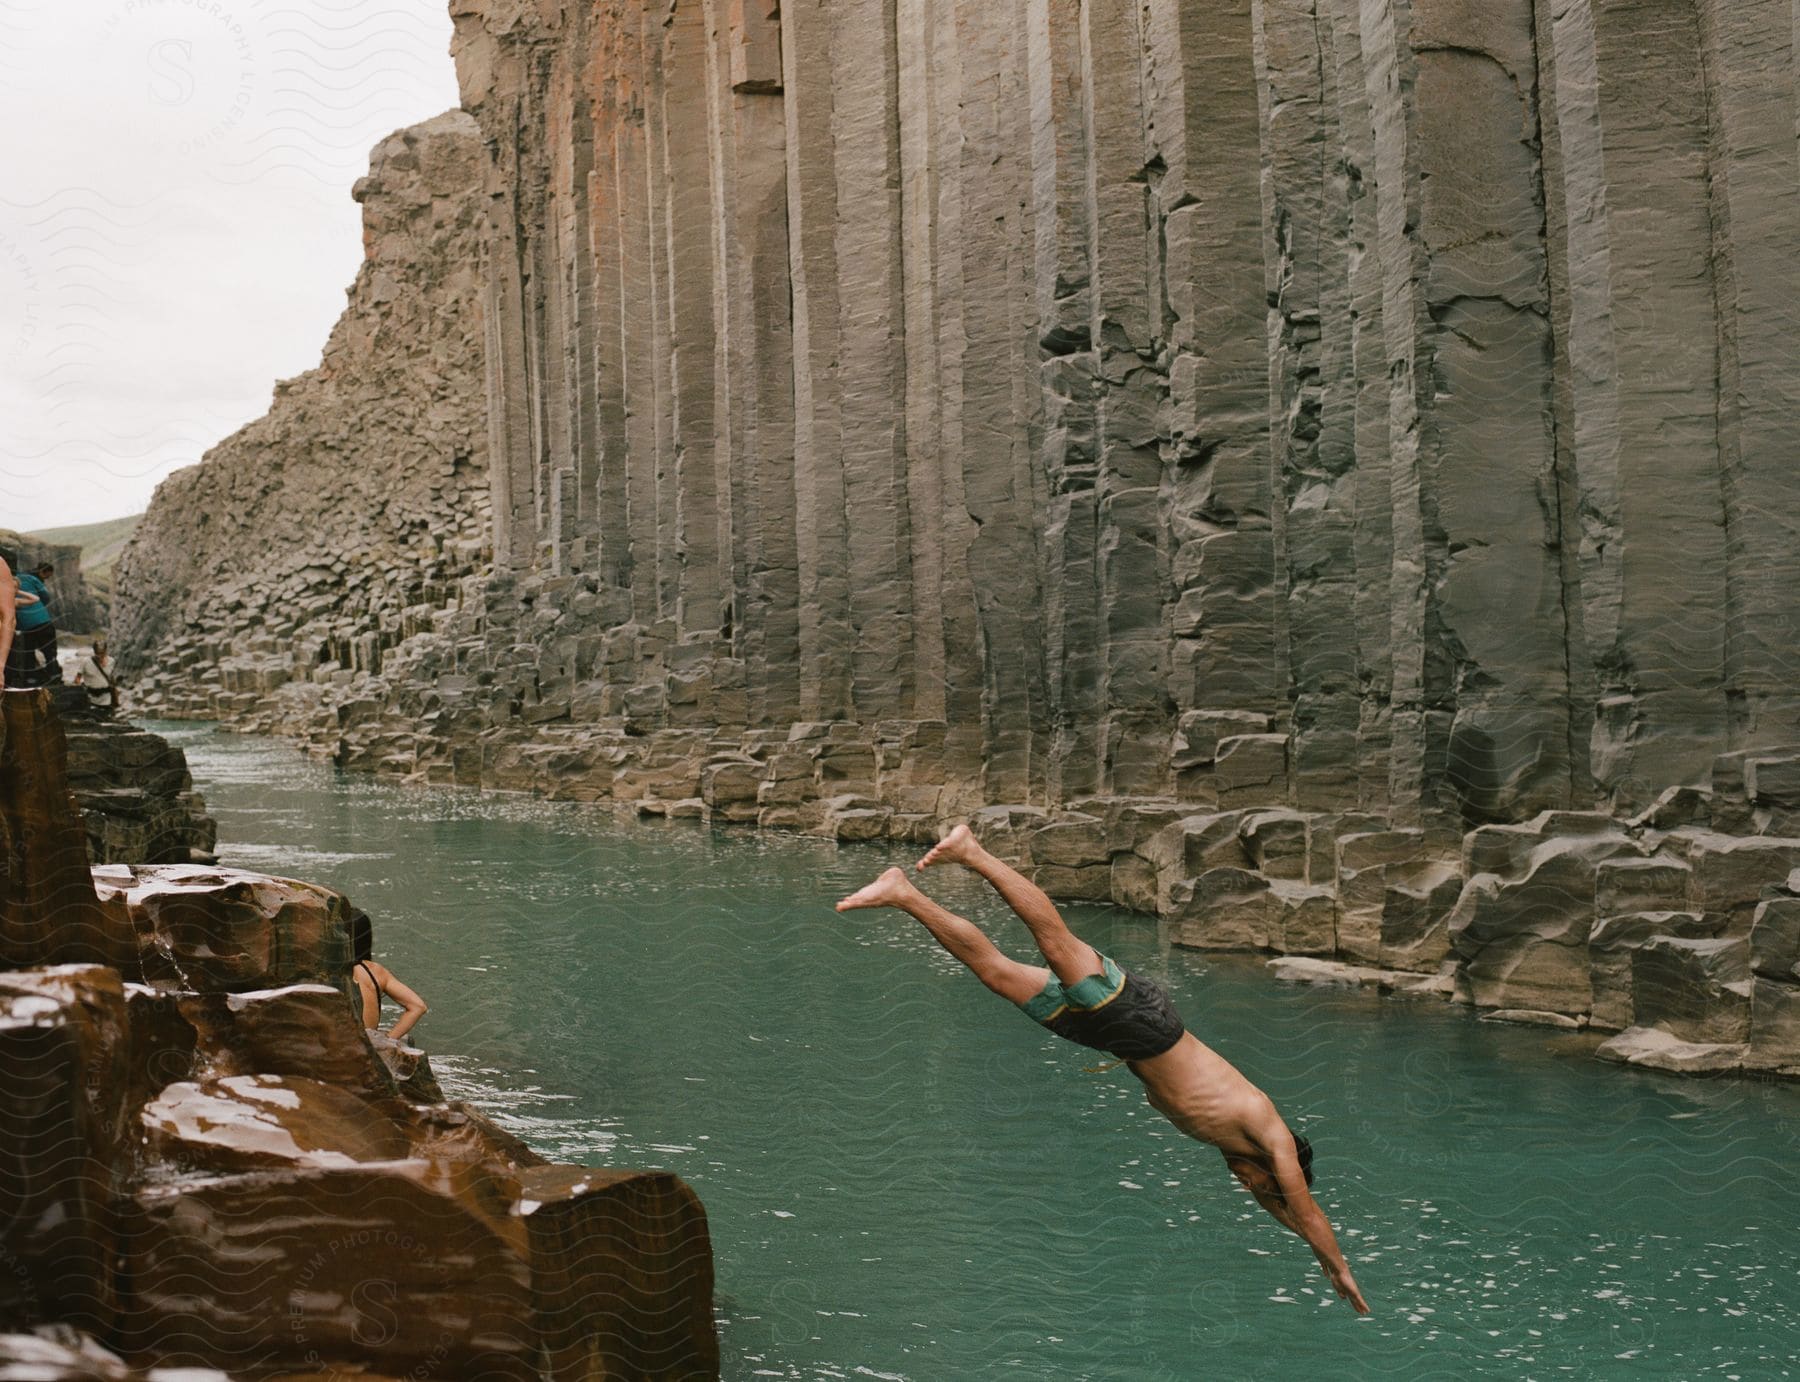 A man jumps in a river by a rocky cliff